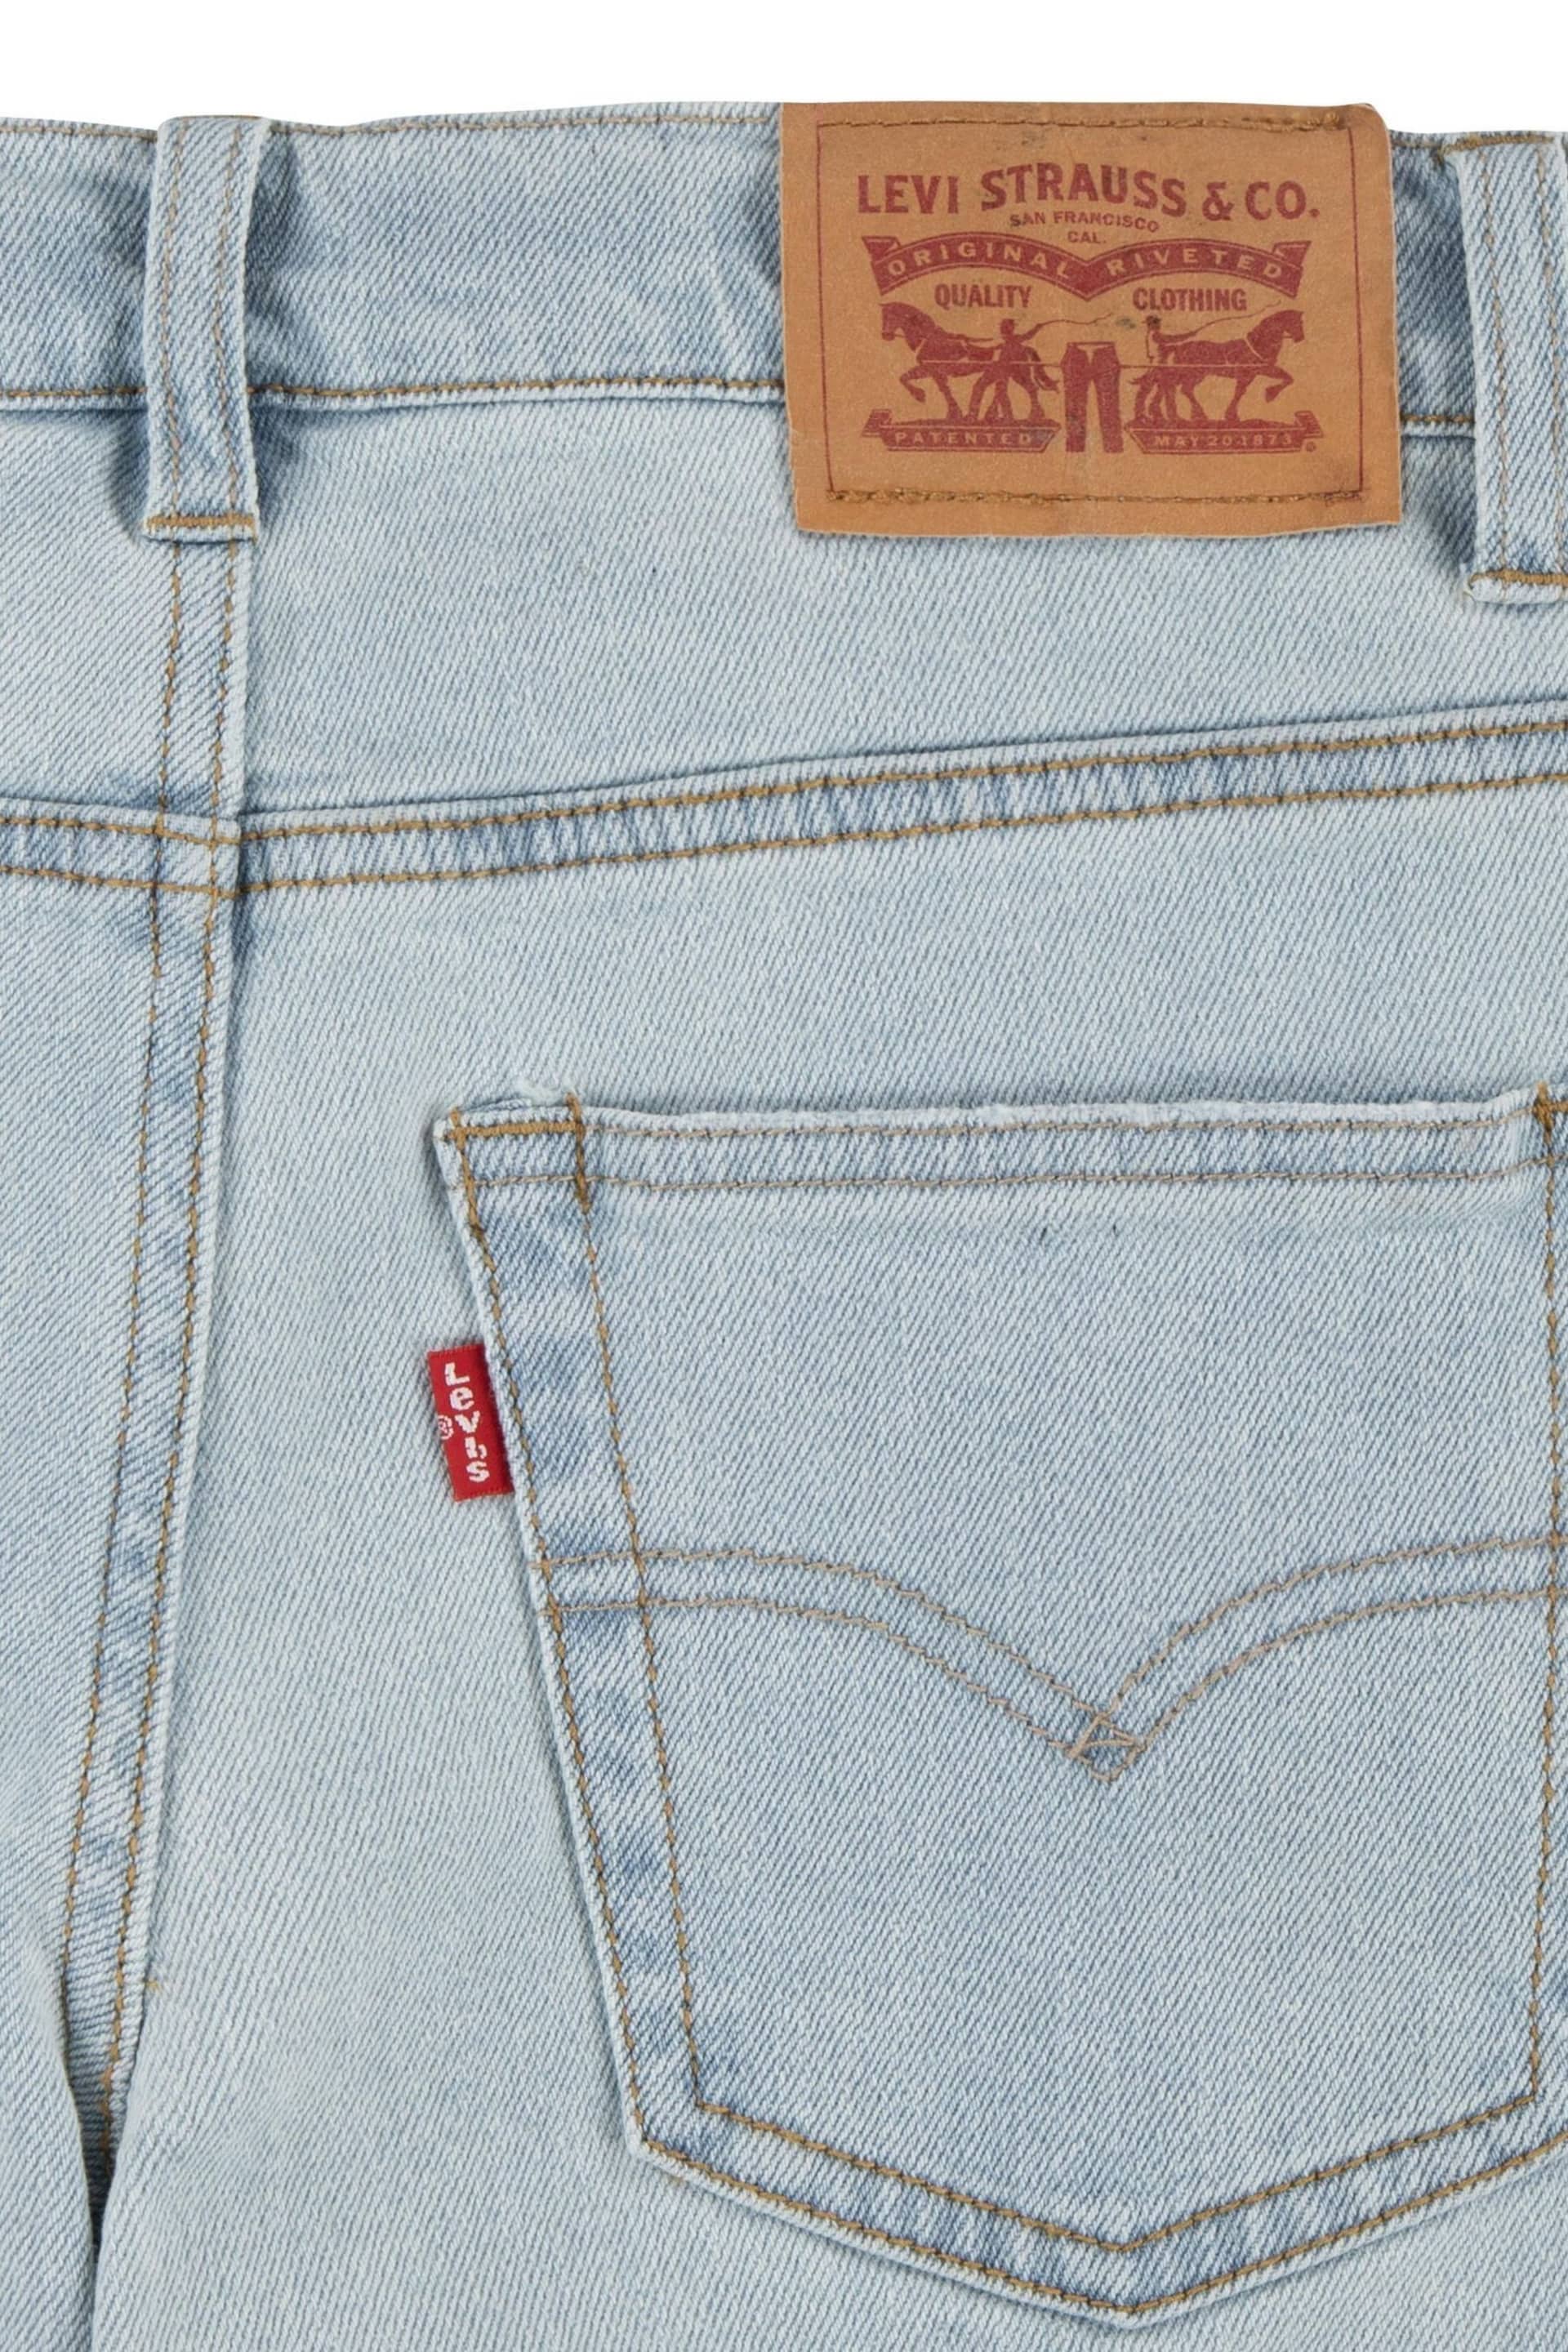 Levi's® Blue 551 Authentic Straight Jeans - Image 8 of 9